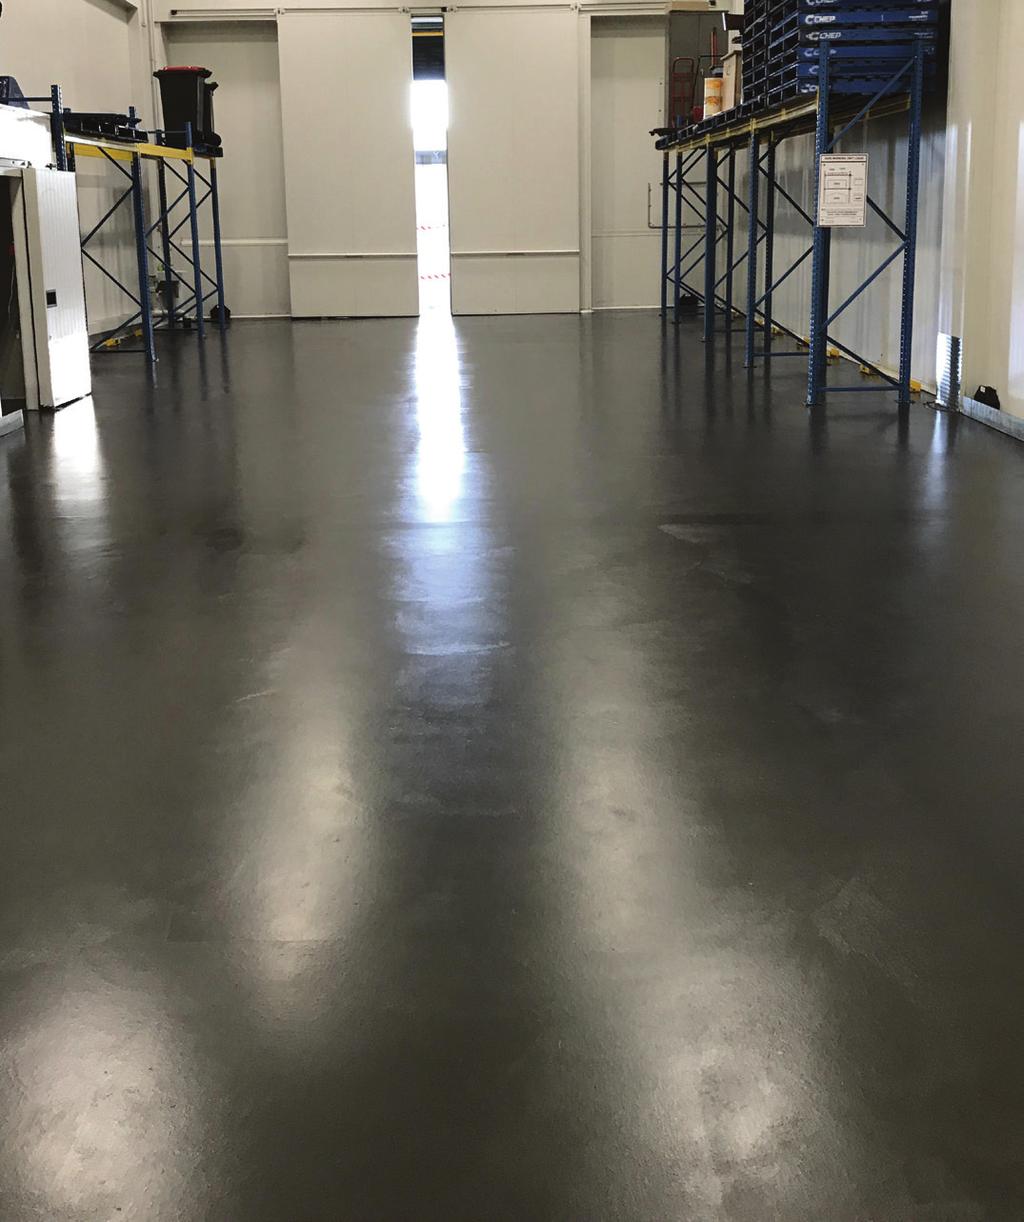 The result is a virtually odourless, very low to zero VOC product that can be applied in sensitive areas, such as patient care and sterile areas, without affecting the surrounding areas.